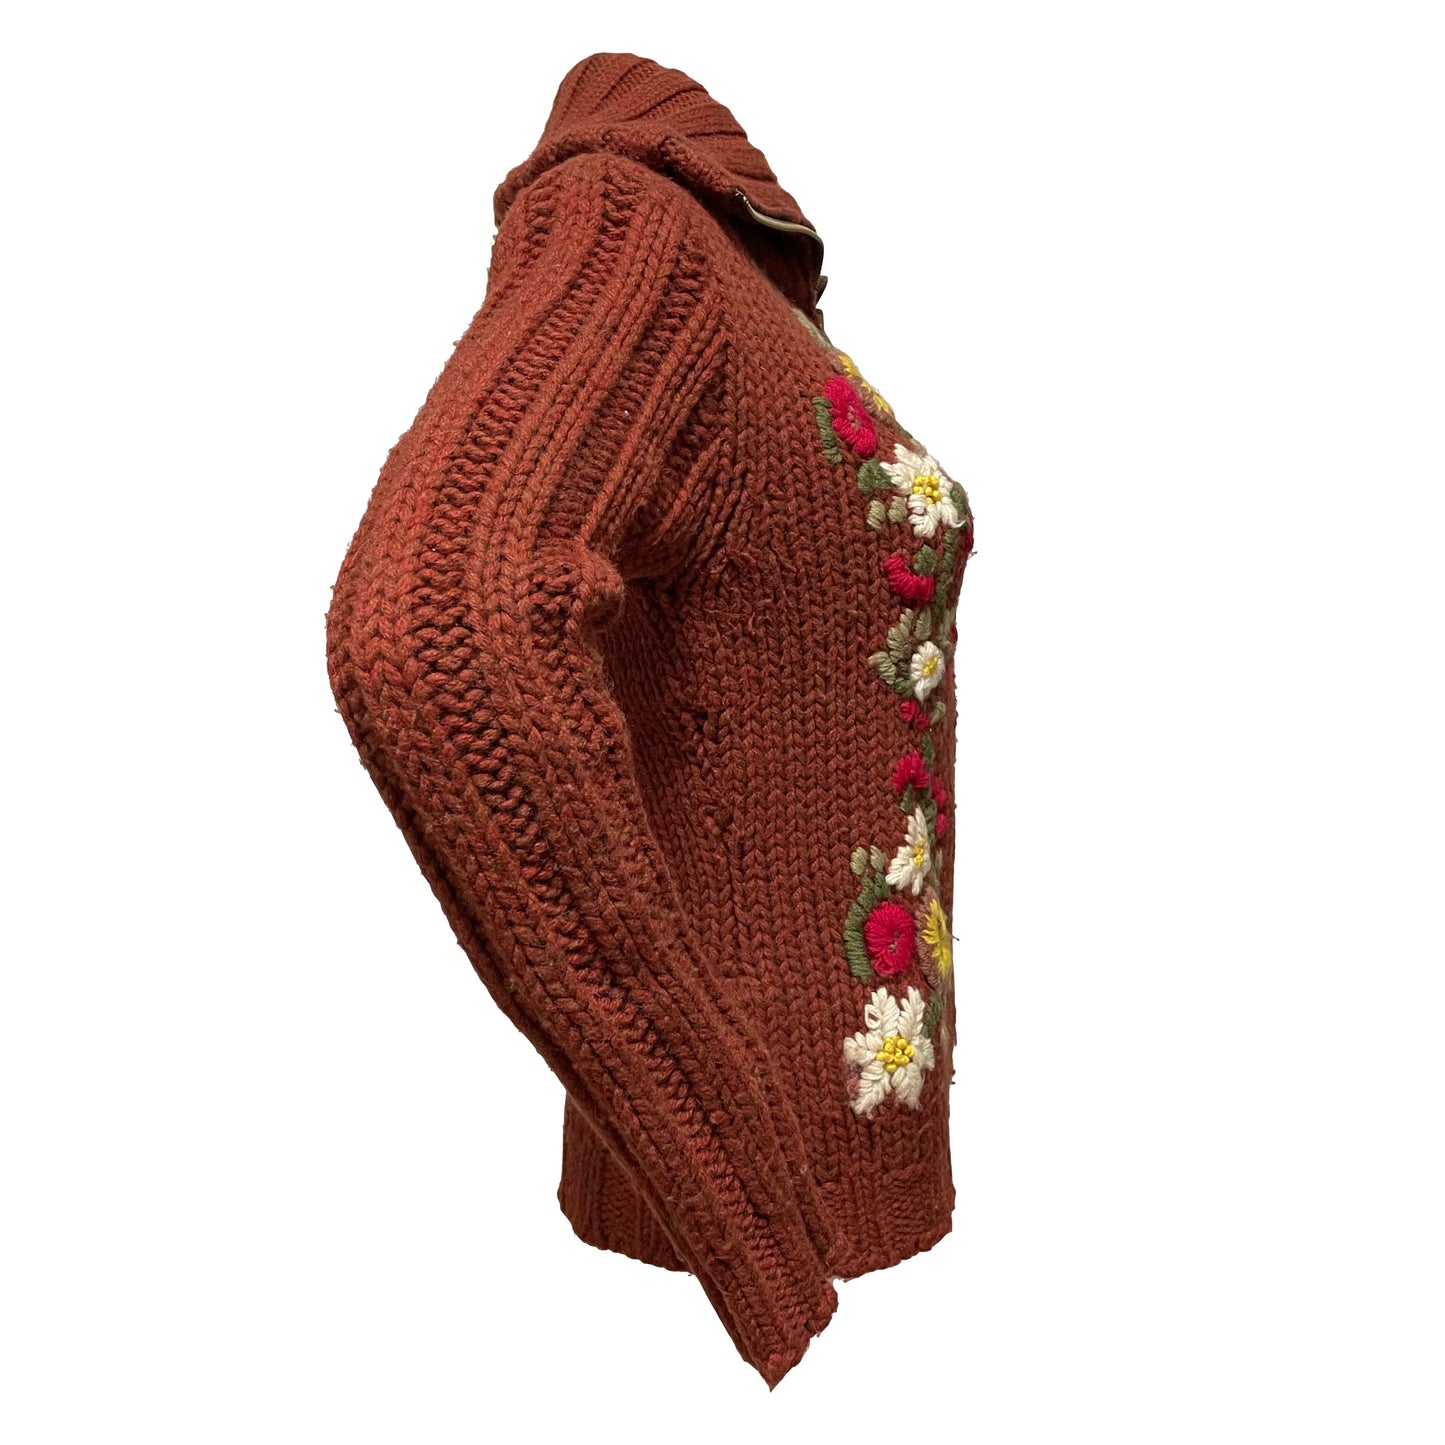 D&G Fall Winter 2002 Embroidered Floral Knit Cardigan